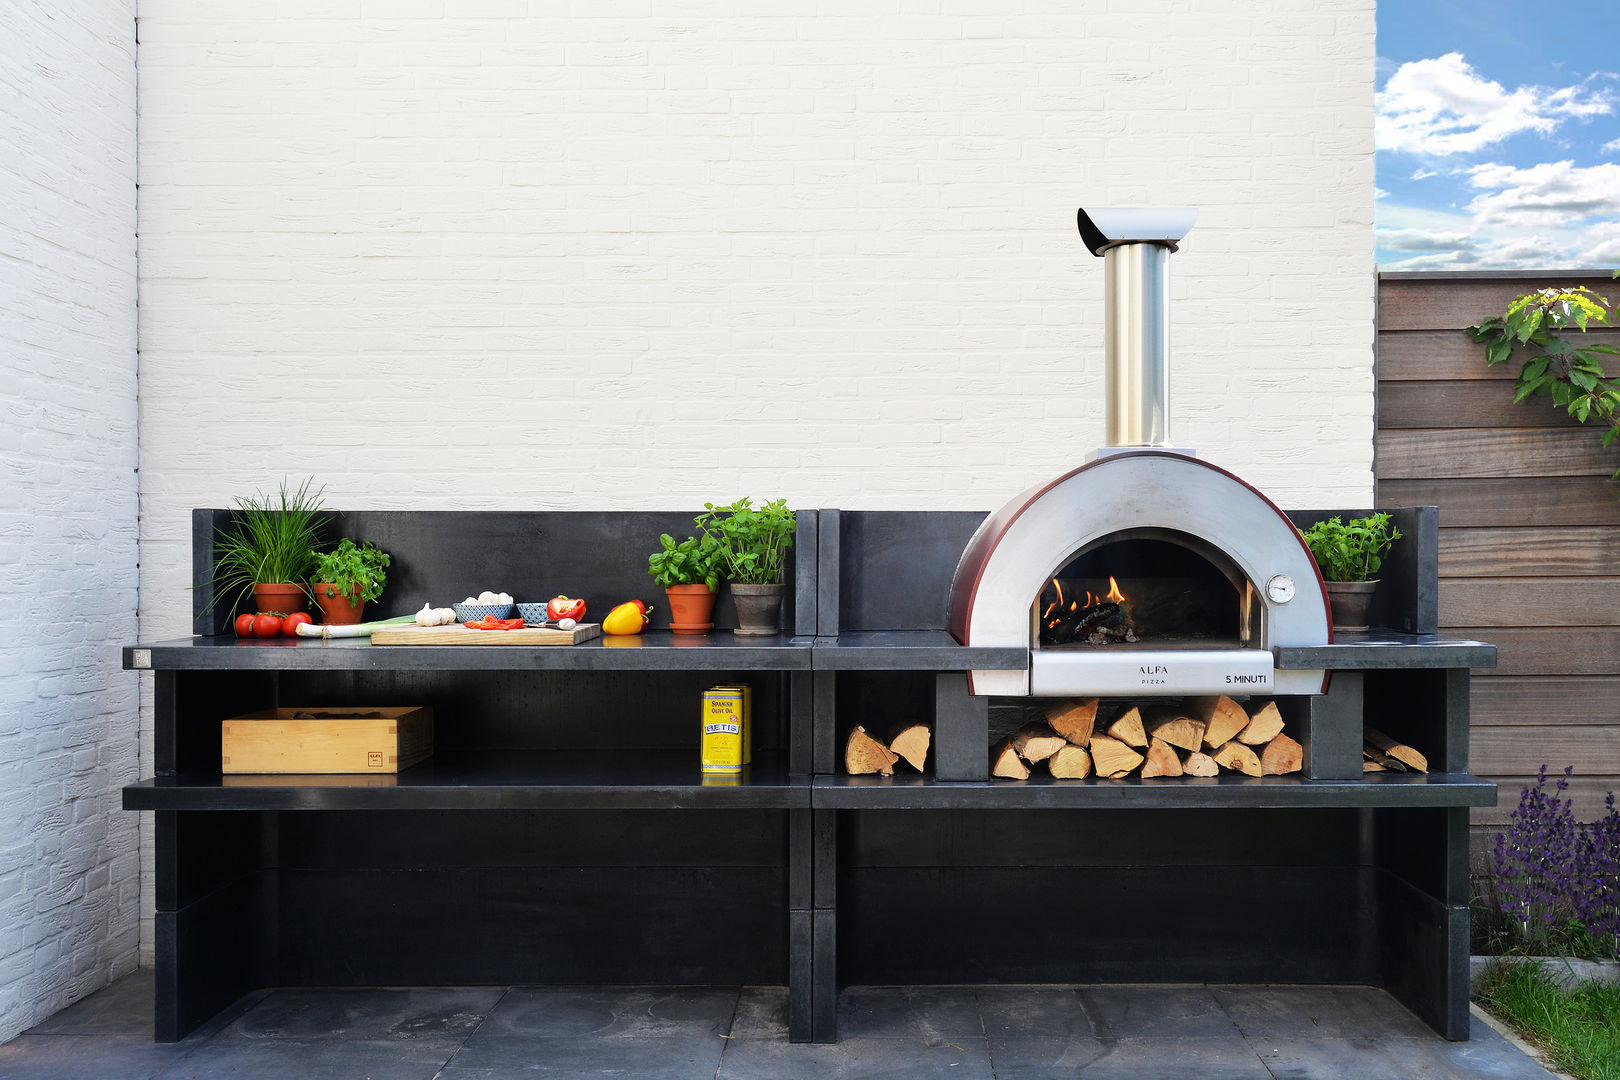 5 MINUTI wood-fired oven front view Alfa Forni Small kitchens wood-fired oven, masonry cooking floor